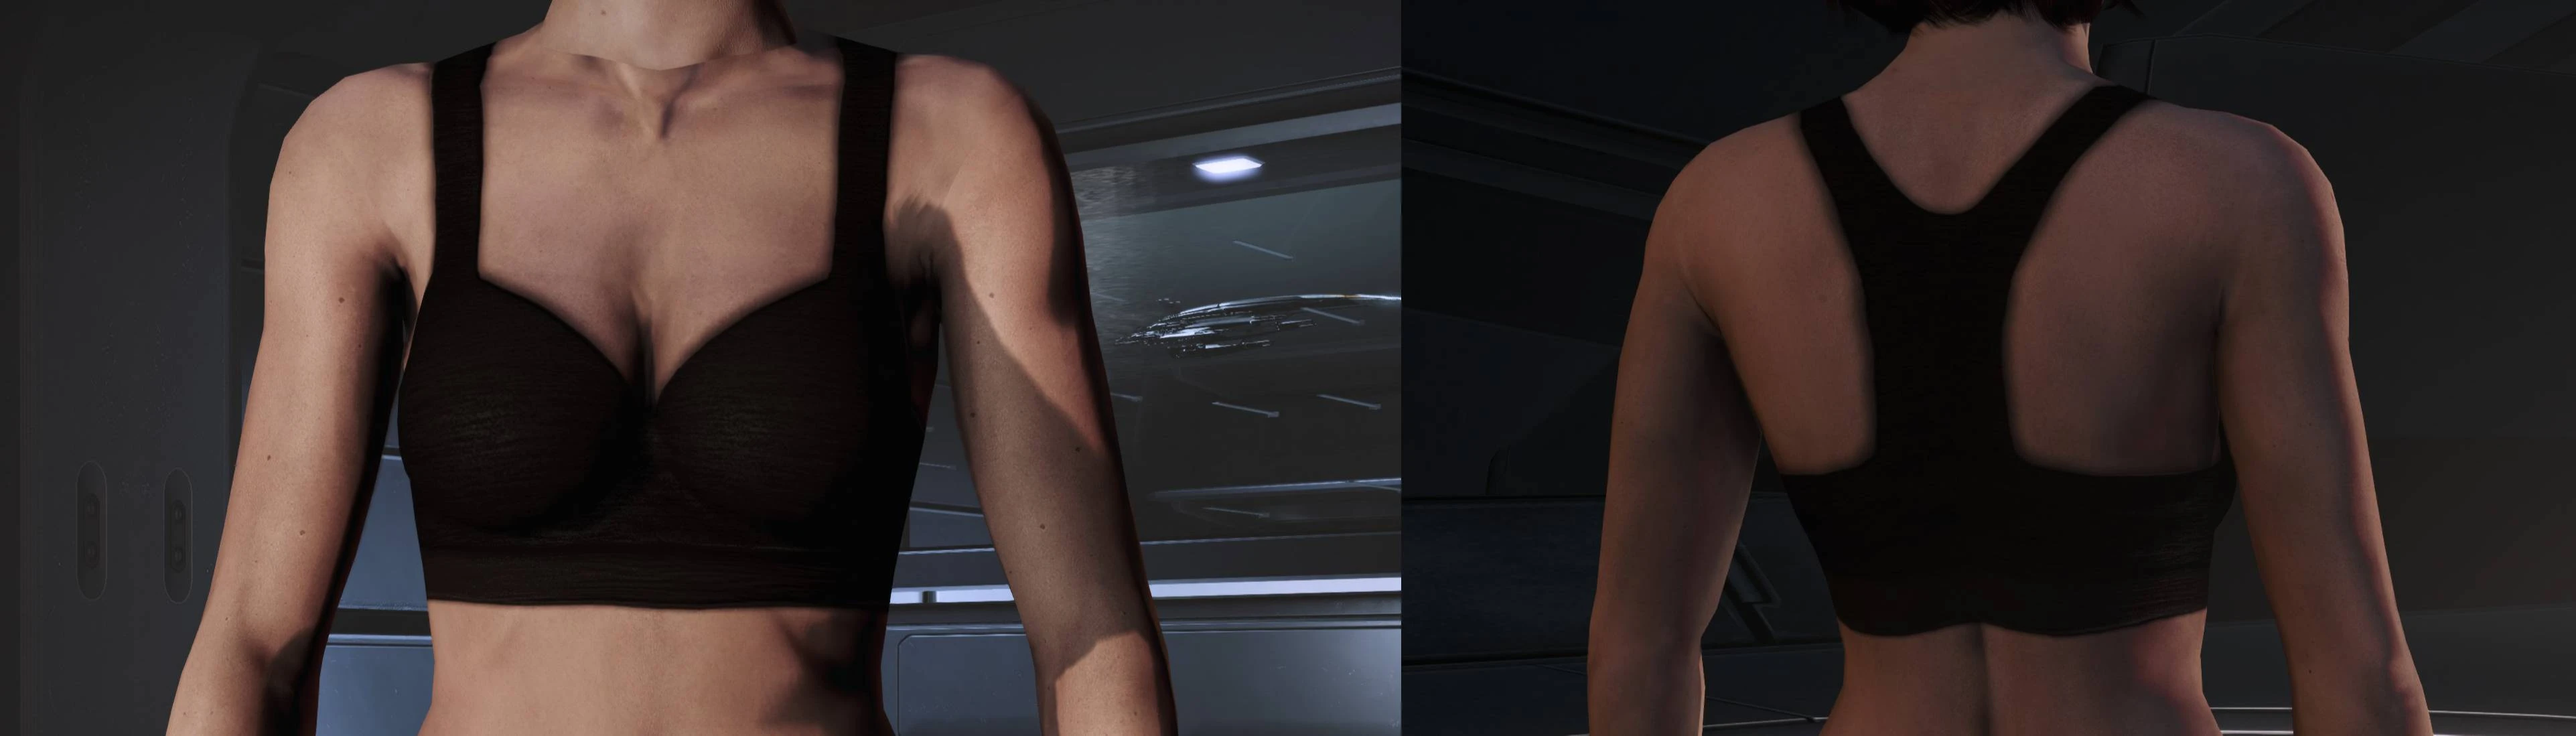 Casual Underwear for Femshep at Mass Effect Legendary Edition